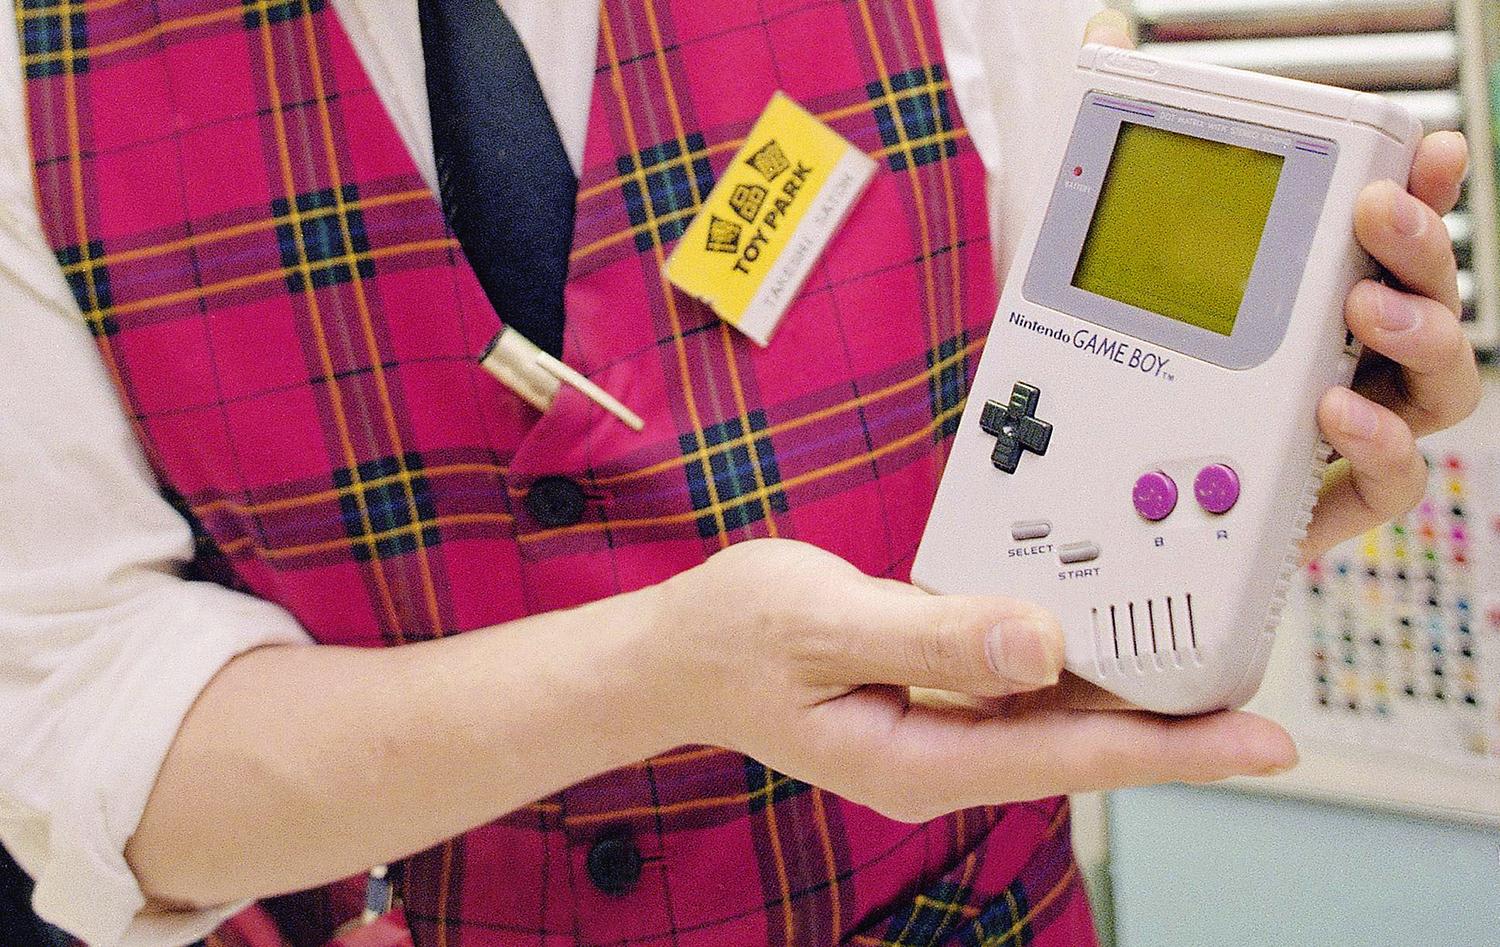 Game Boy, Handheld Console That Started It Turns